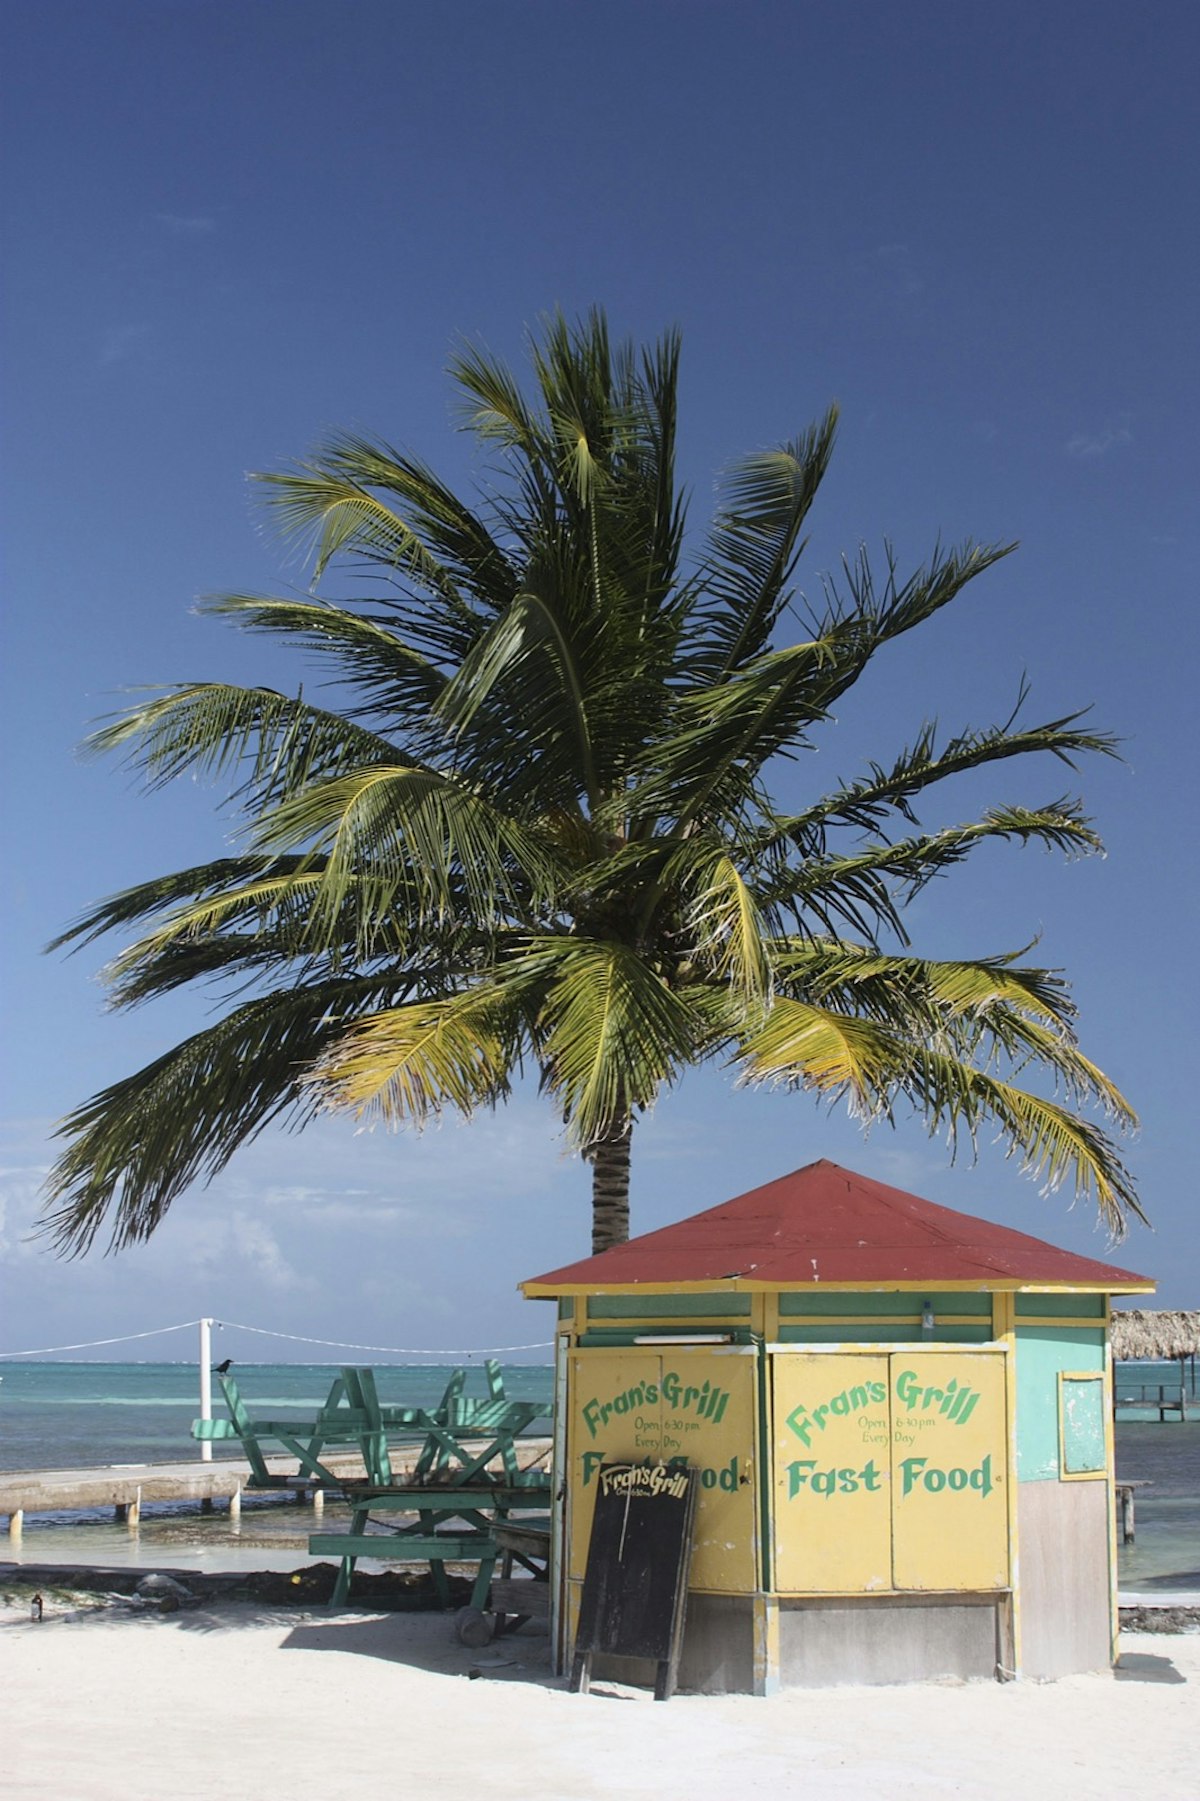 CAYE CAULKER, BELIZE - DECEMBER 27:  Fran's Grill on December 27, 2008 in Caye Caulker, Belize. The laid back island of Caye Caulker, in close proximity to the world's second largest barrier reef, is a popular travel destination for both European and American tourists.  (Photo by Nina Raingold/Getty Images)